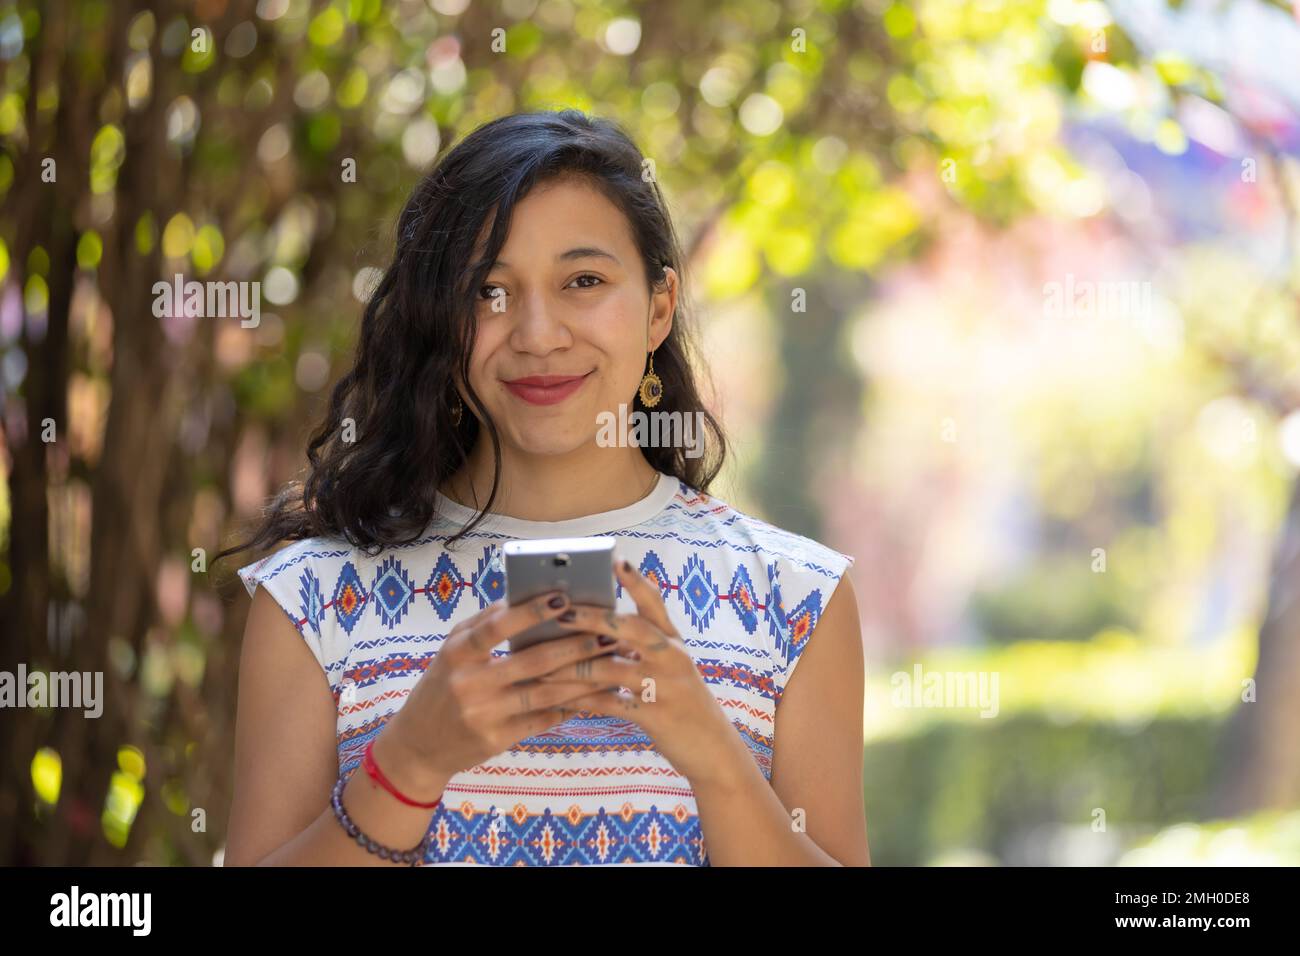 Real Mexican woman holding smart phone and looking at camera outdoors Stock Photo